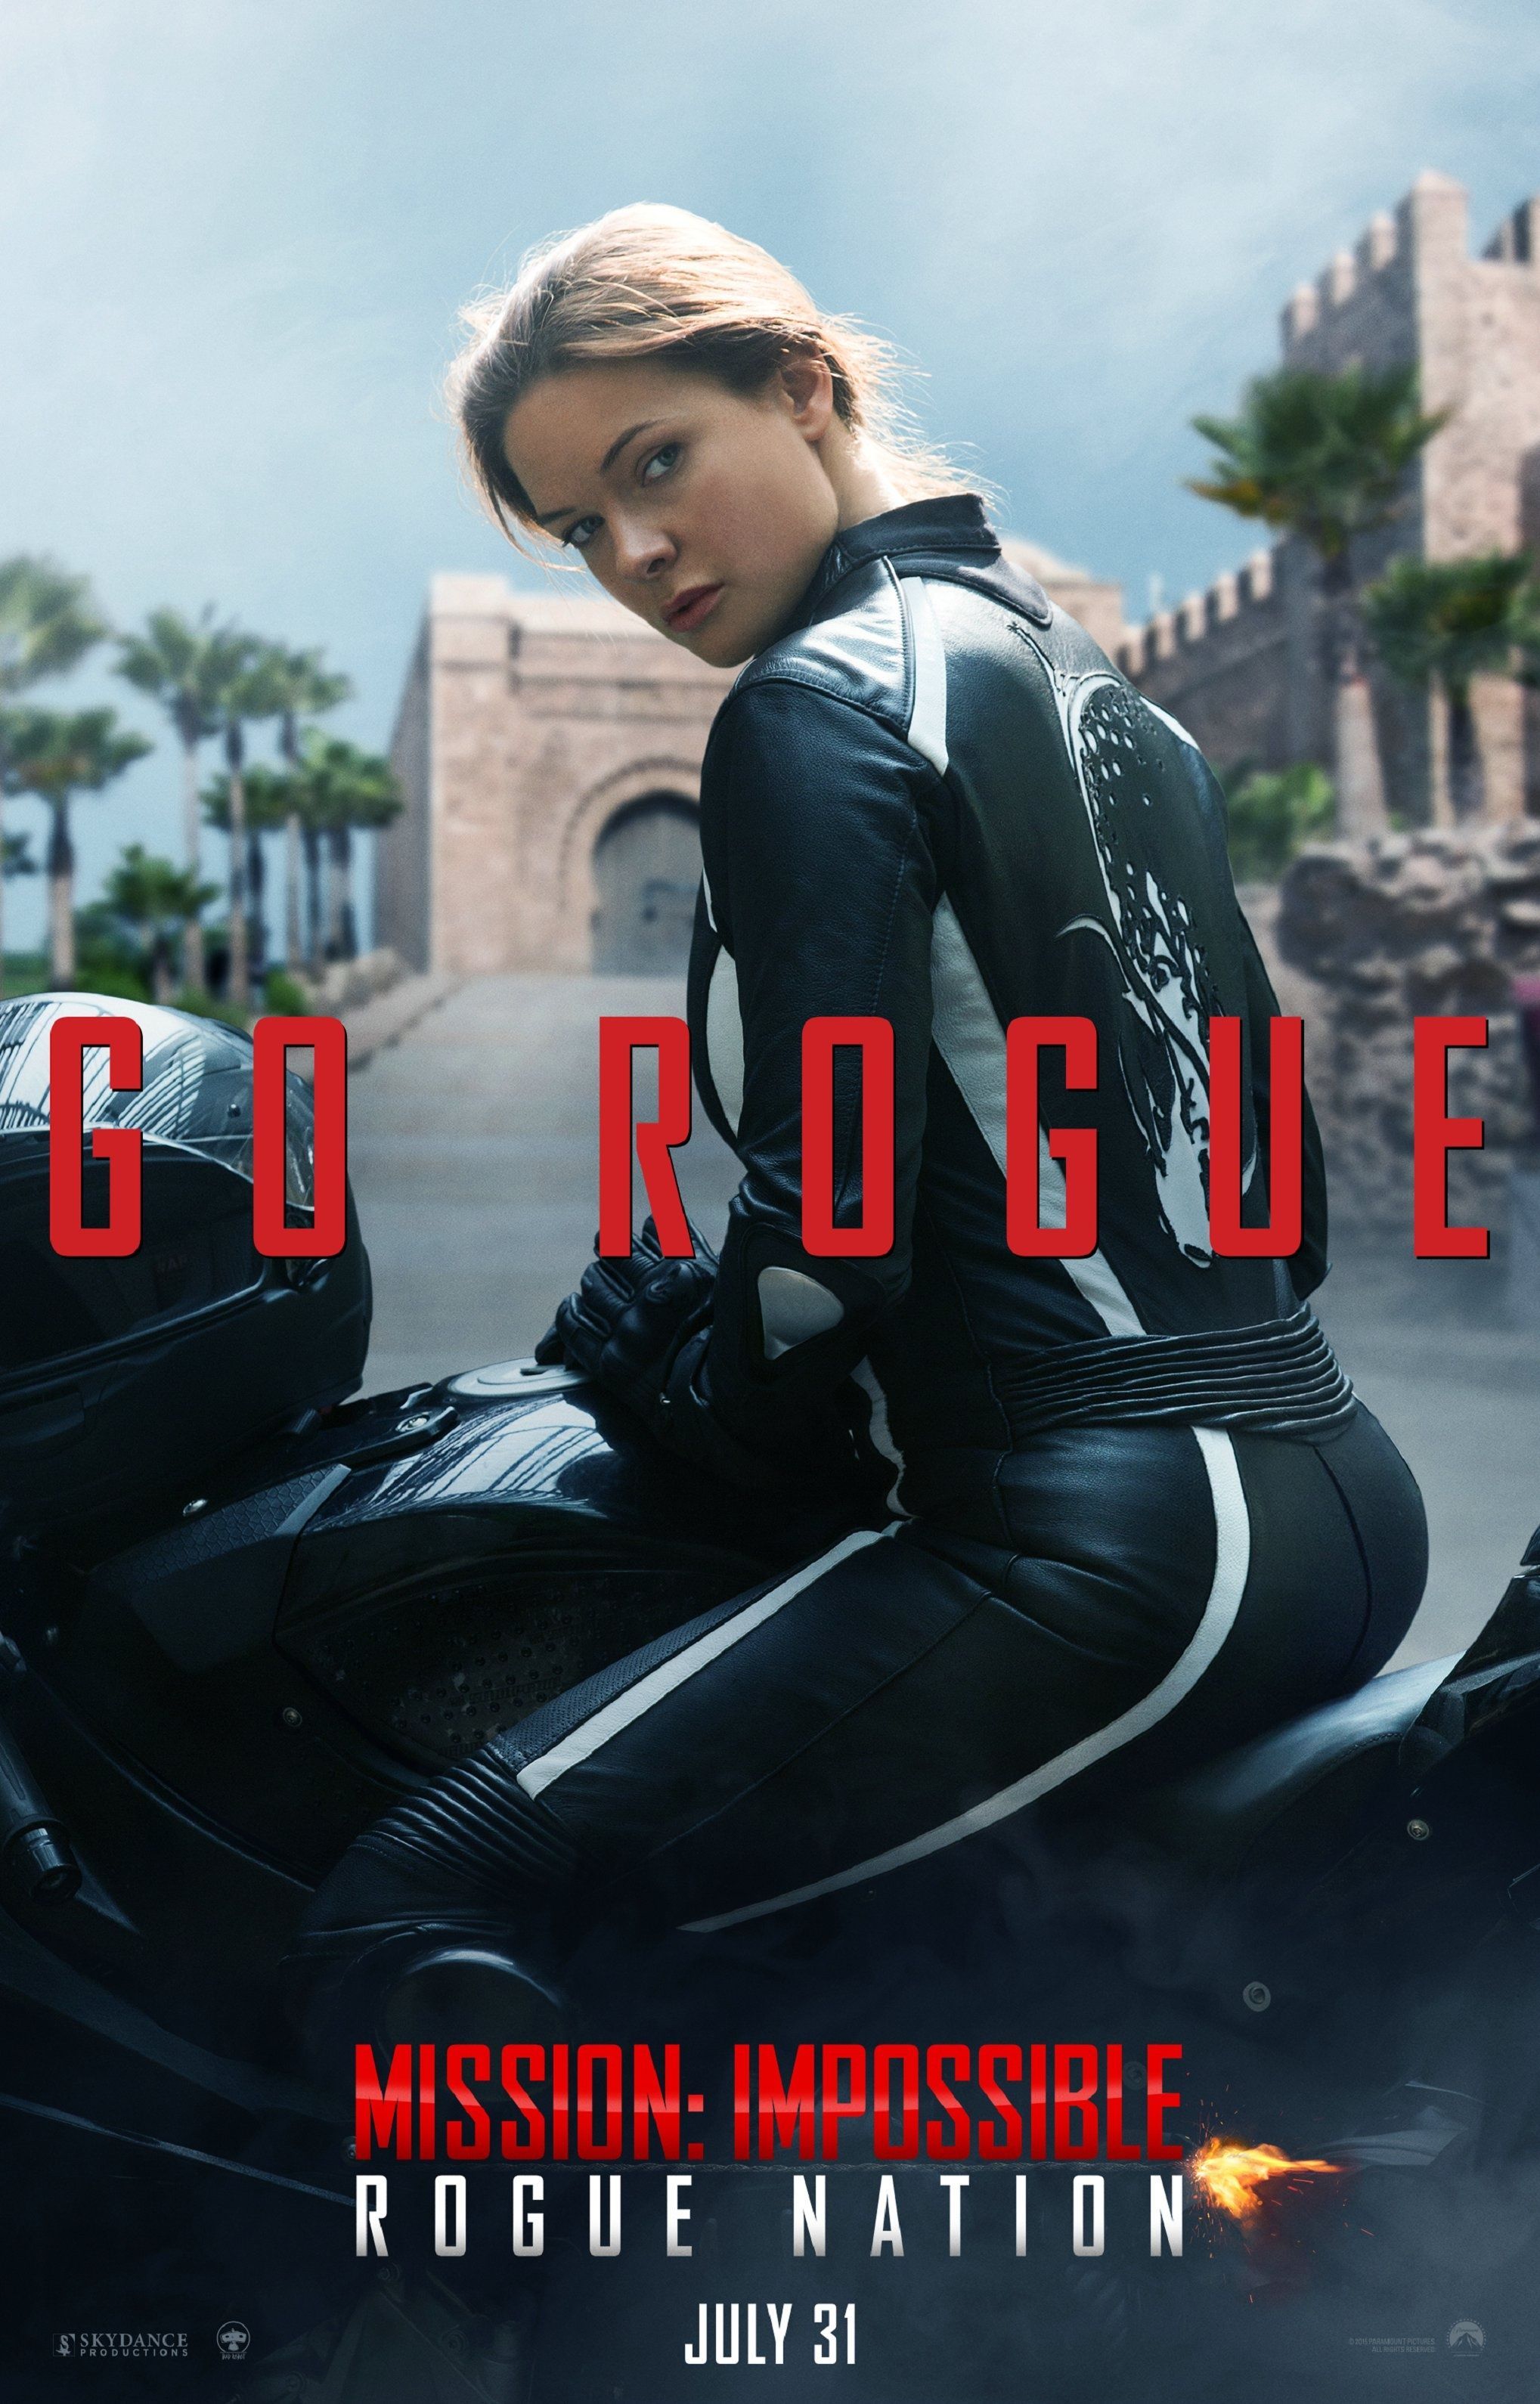 Rebecca Ferguson in Mission: Impossible - Rogue Nation Poster